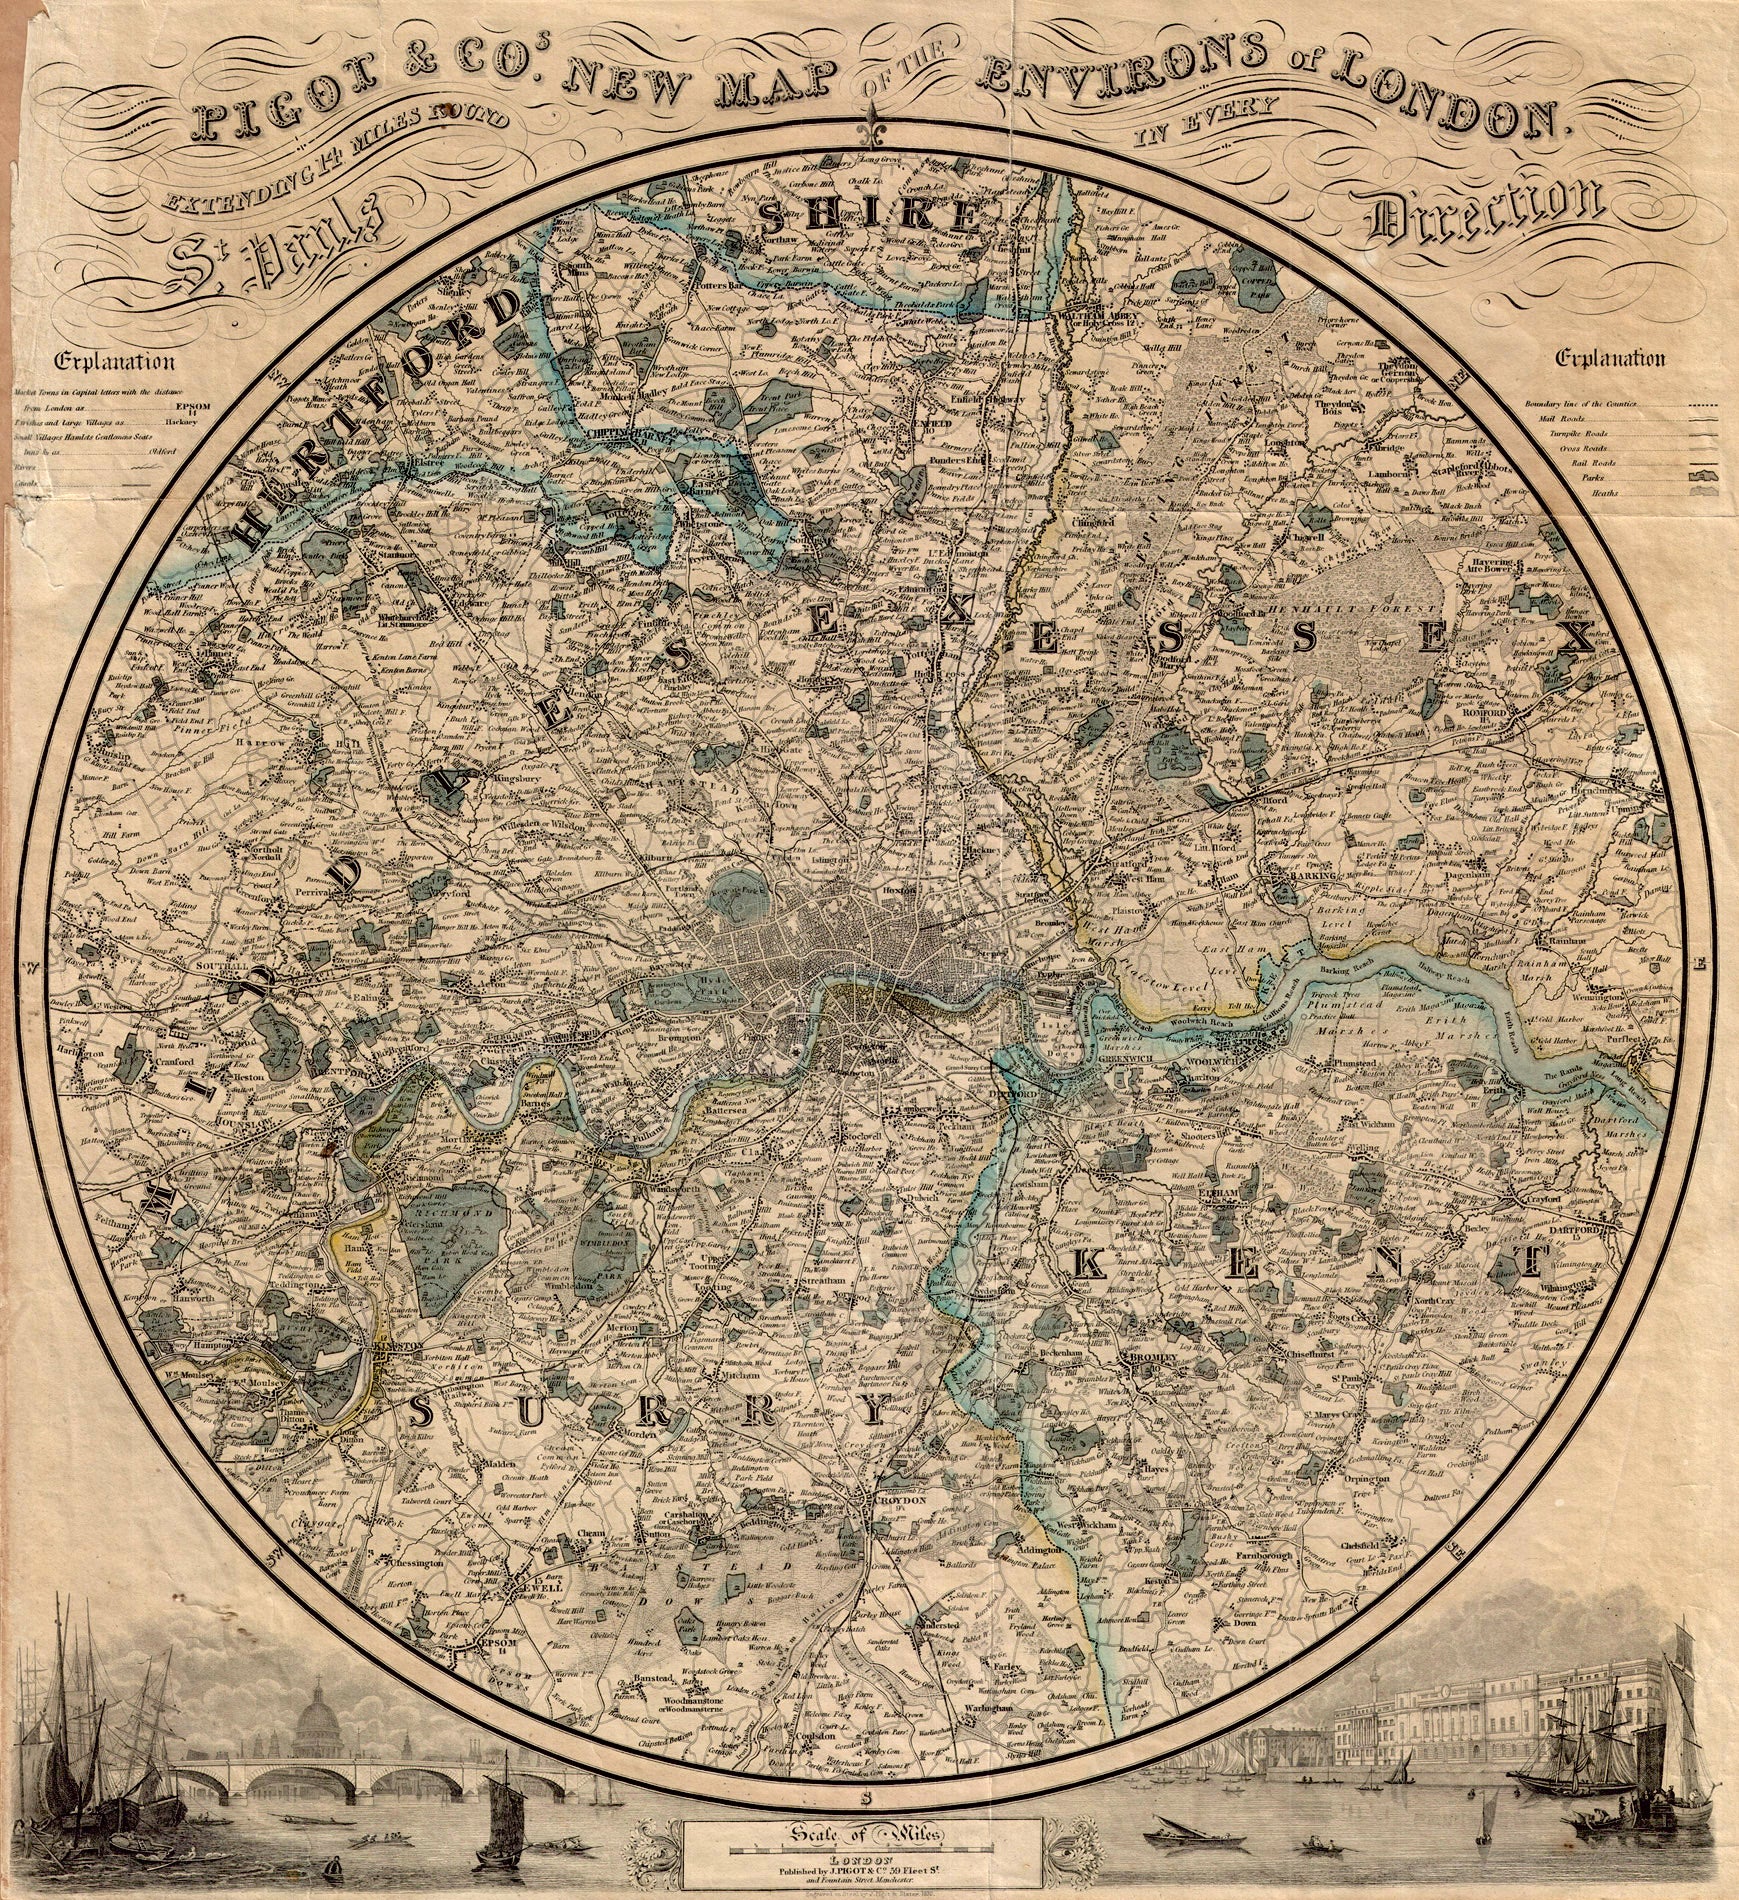 (England - London) Pigot & Co.s New Map Of The Environs of London.